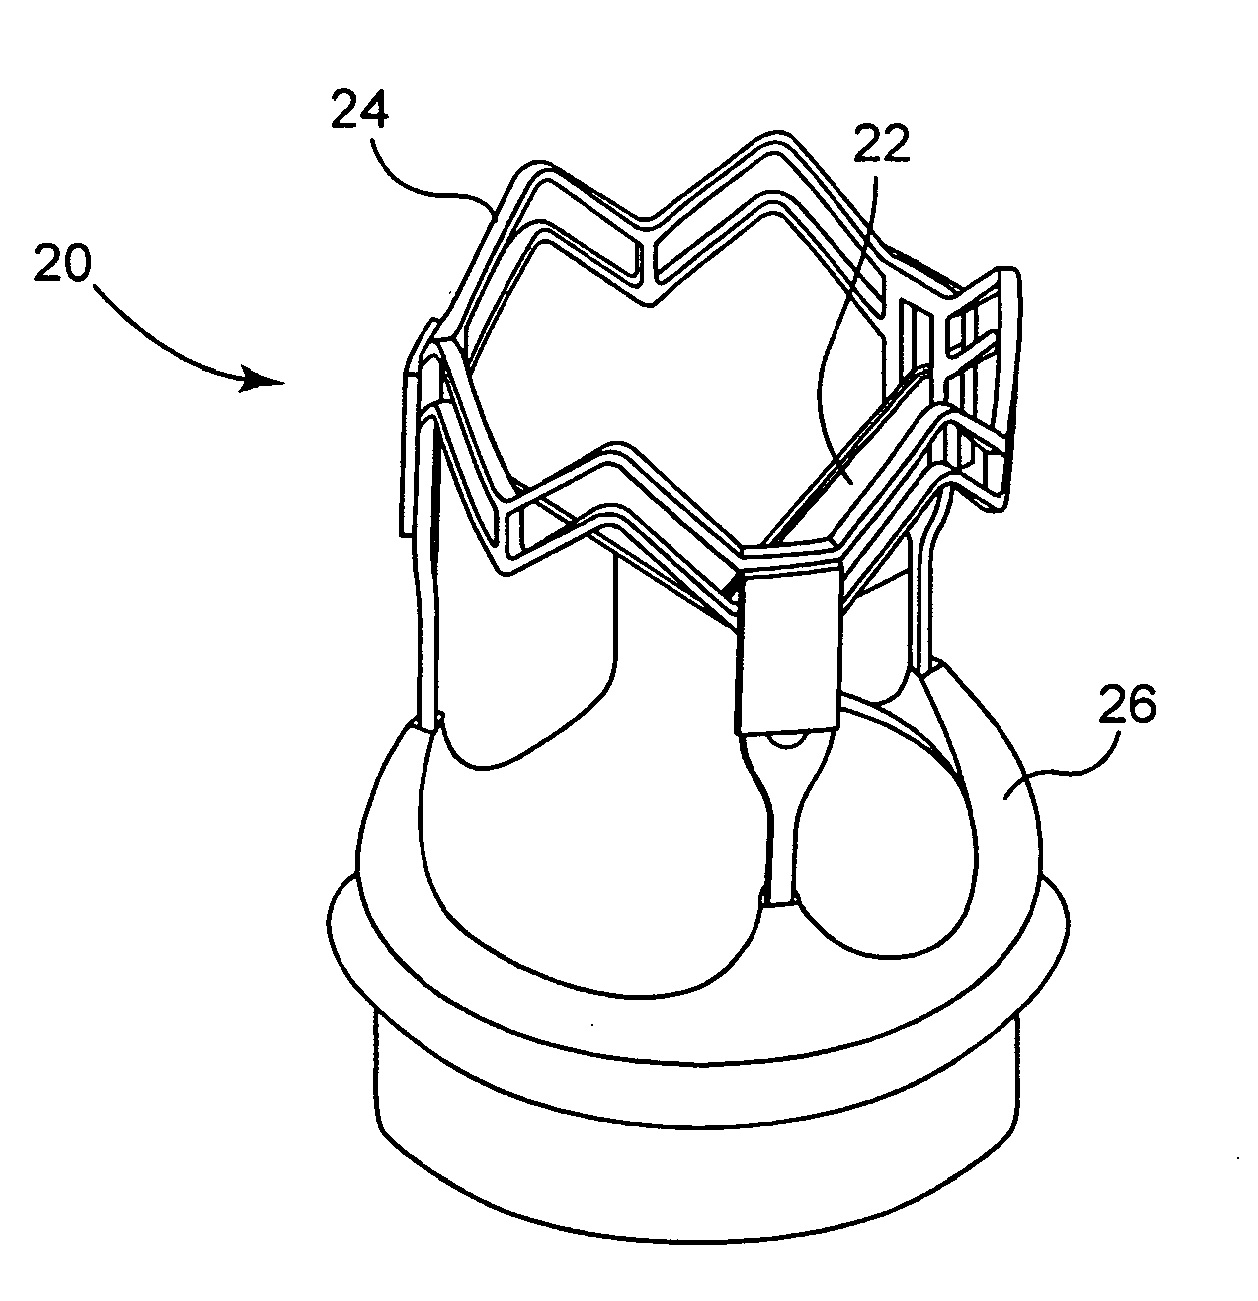 Methods and systems for reducing paravalvular leakage in heart valves